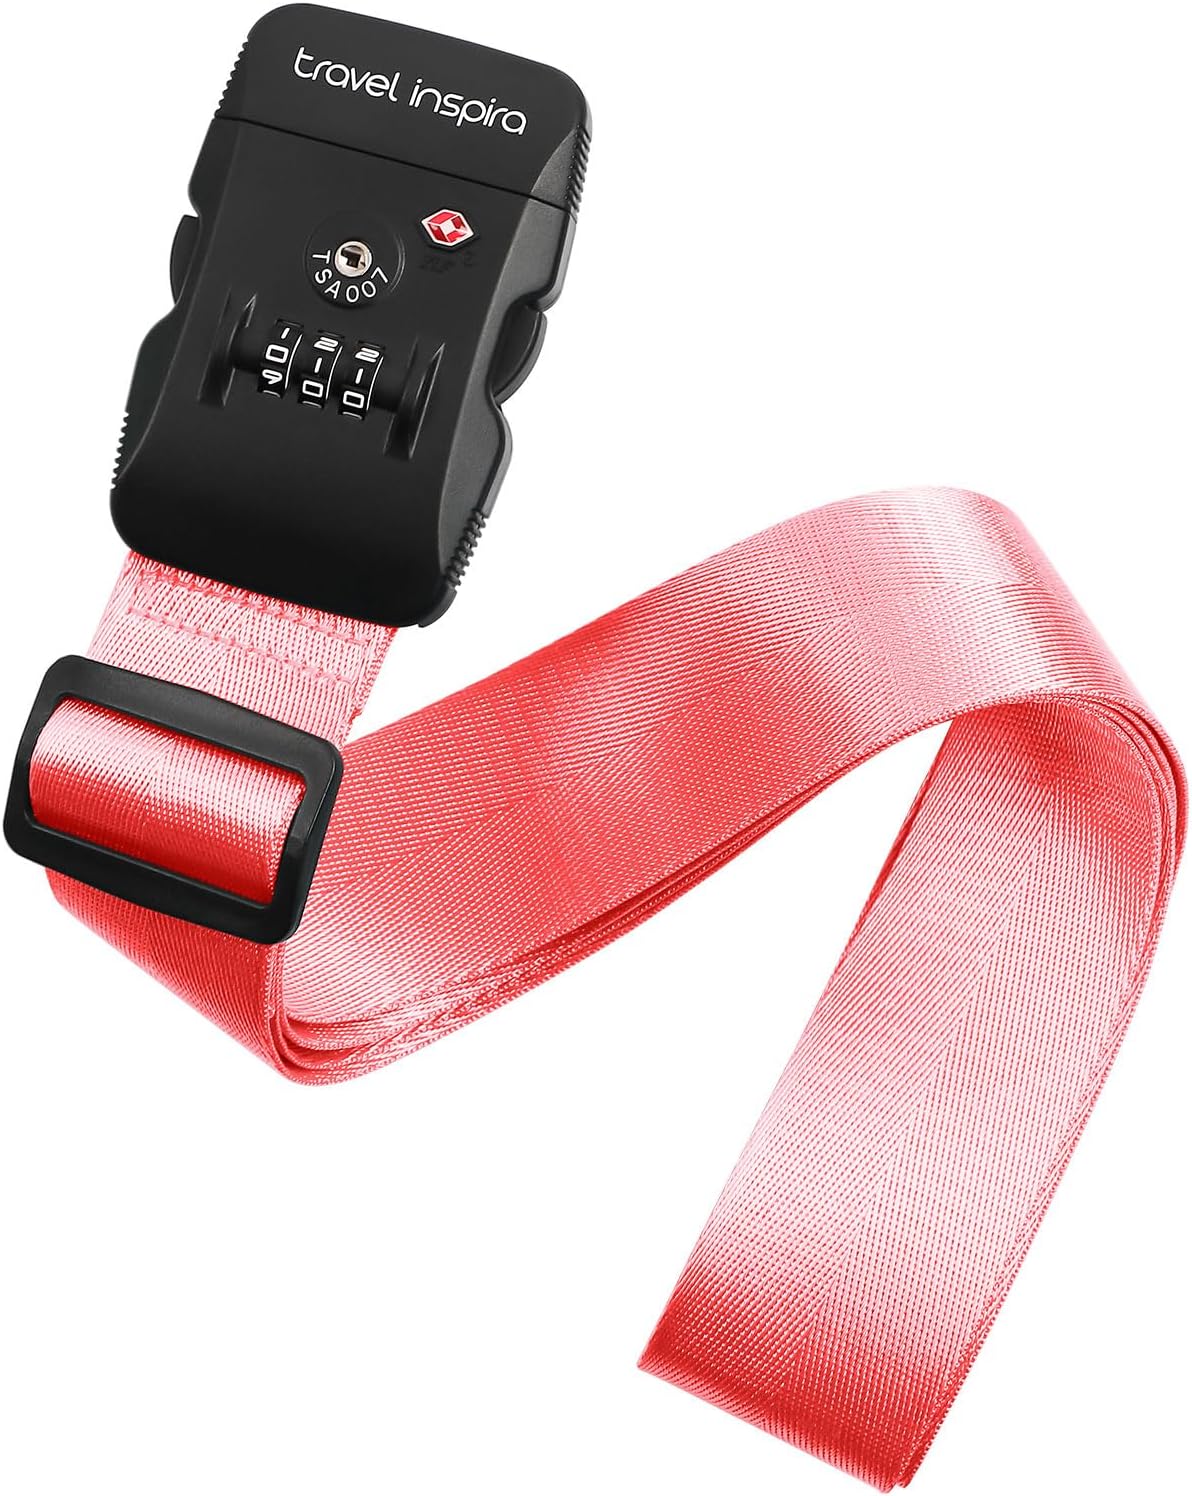 Travel Inspira Luggage Straps with TSA Combination Lock - Adjustable, Easy to Use, Protect Your Luggage, Pink